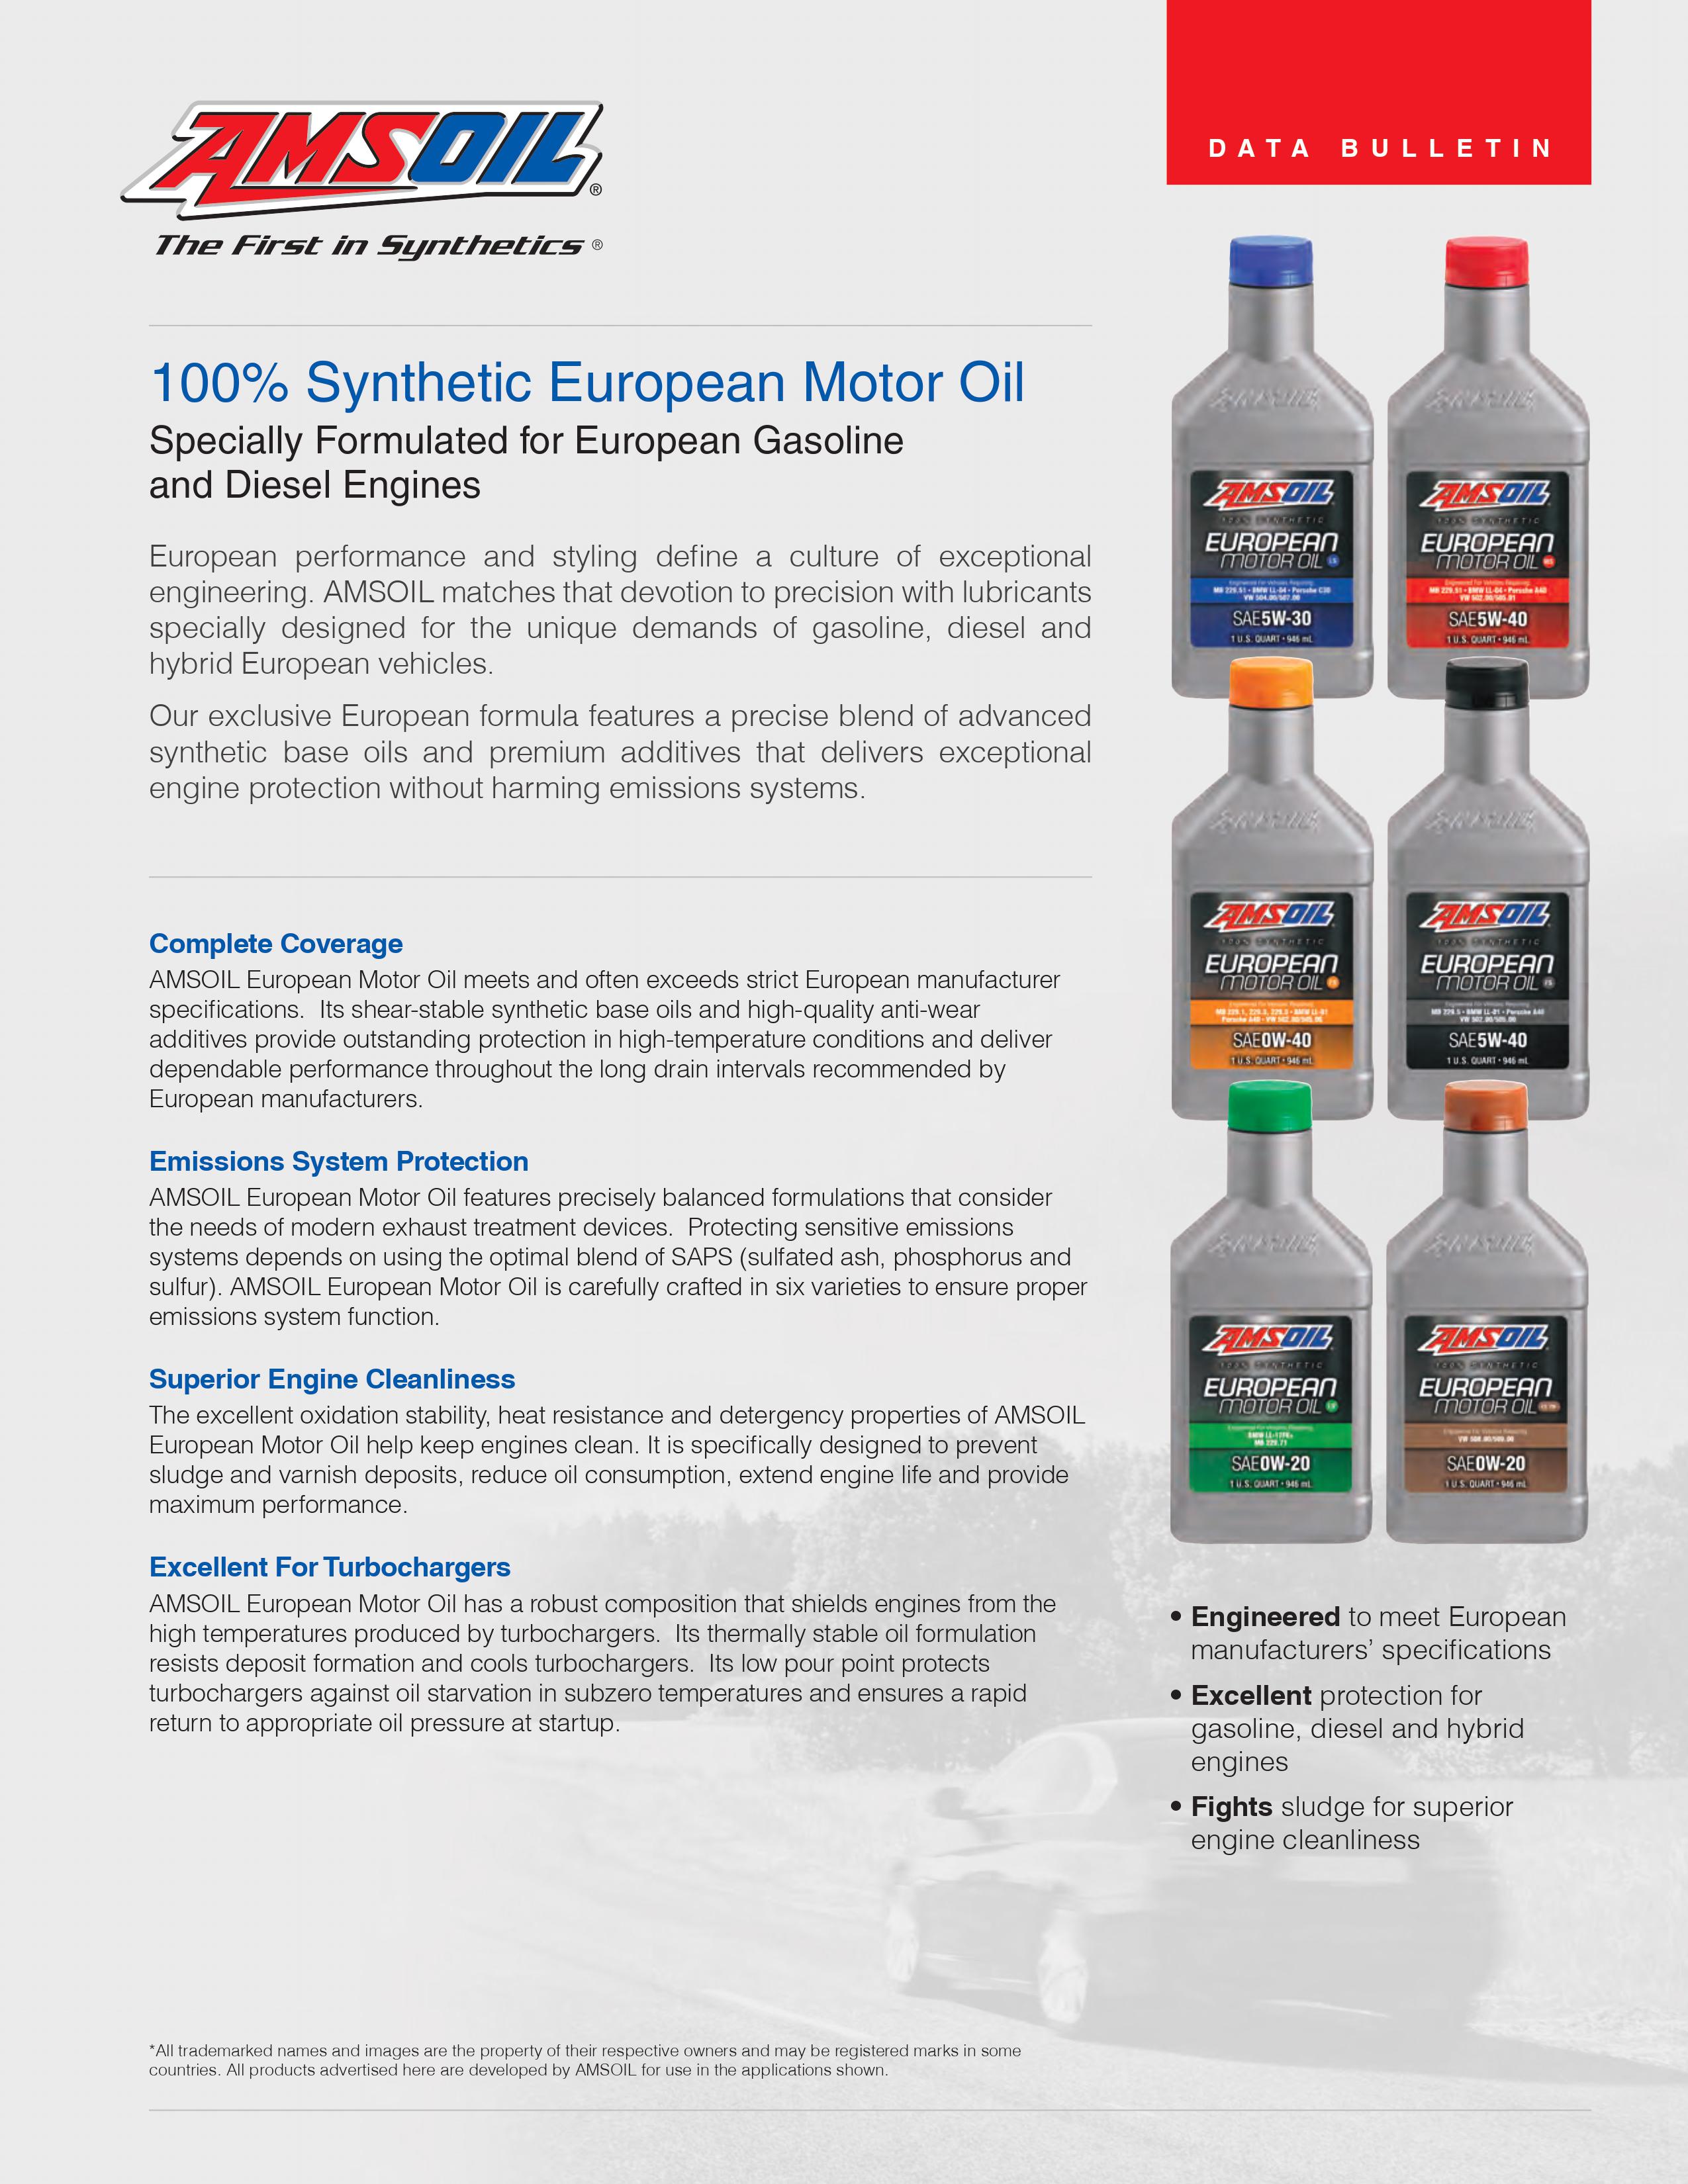 AMSOIL 5W30 LS EUROPEAN FORMULA ENGINE OIL FULLY SYNTHETIC (1